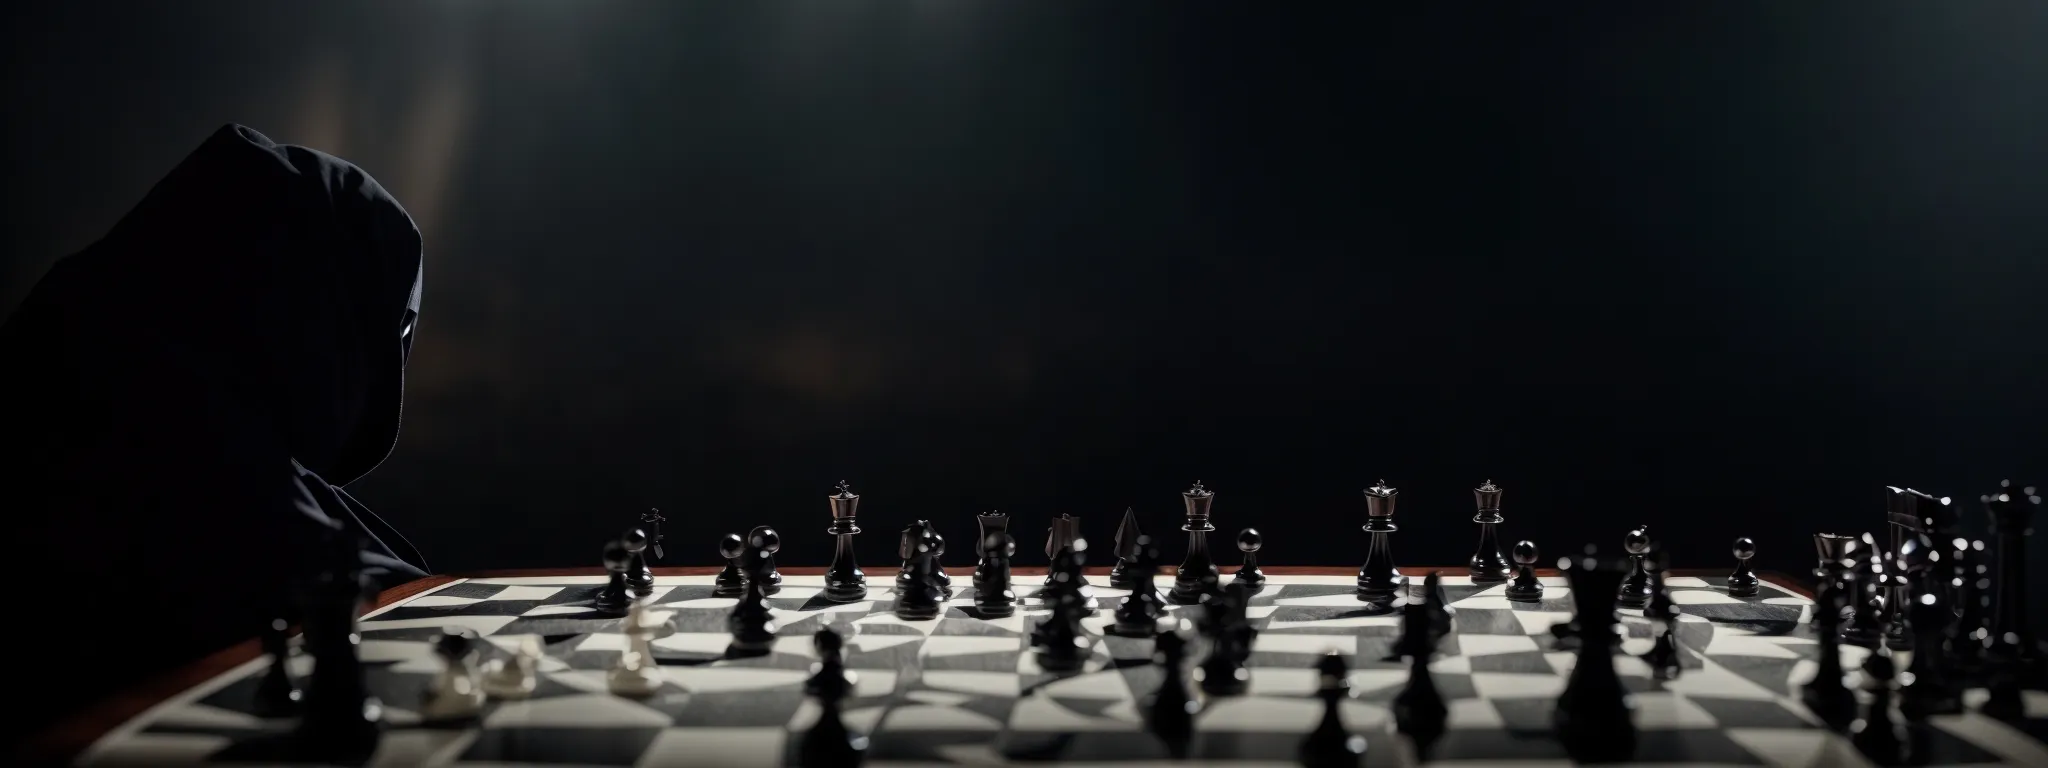 two magicians, one cloaked in shadow with a mischievous grin and the other bathed in light with a trustworthy demeanor, face off across a dividing line on a chessboard.